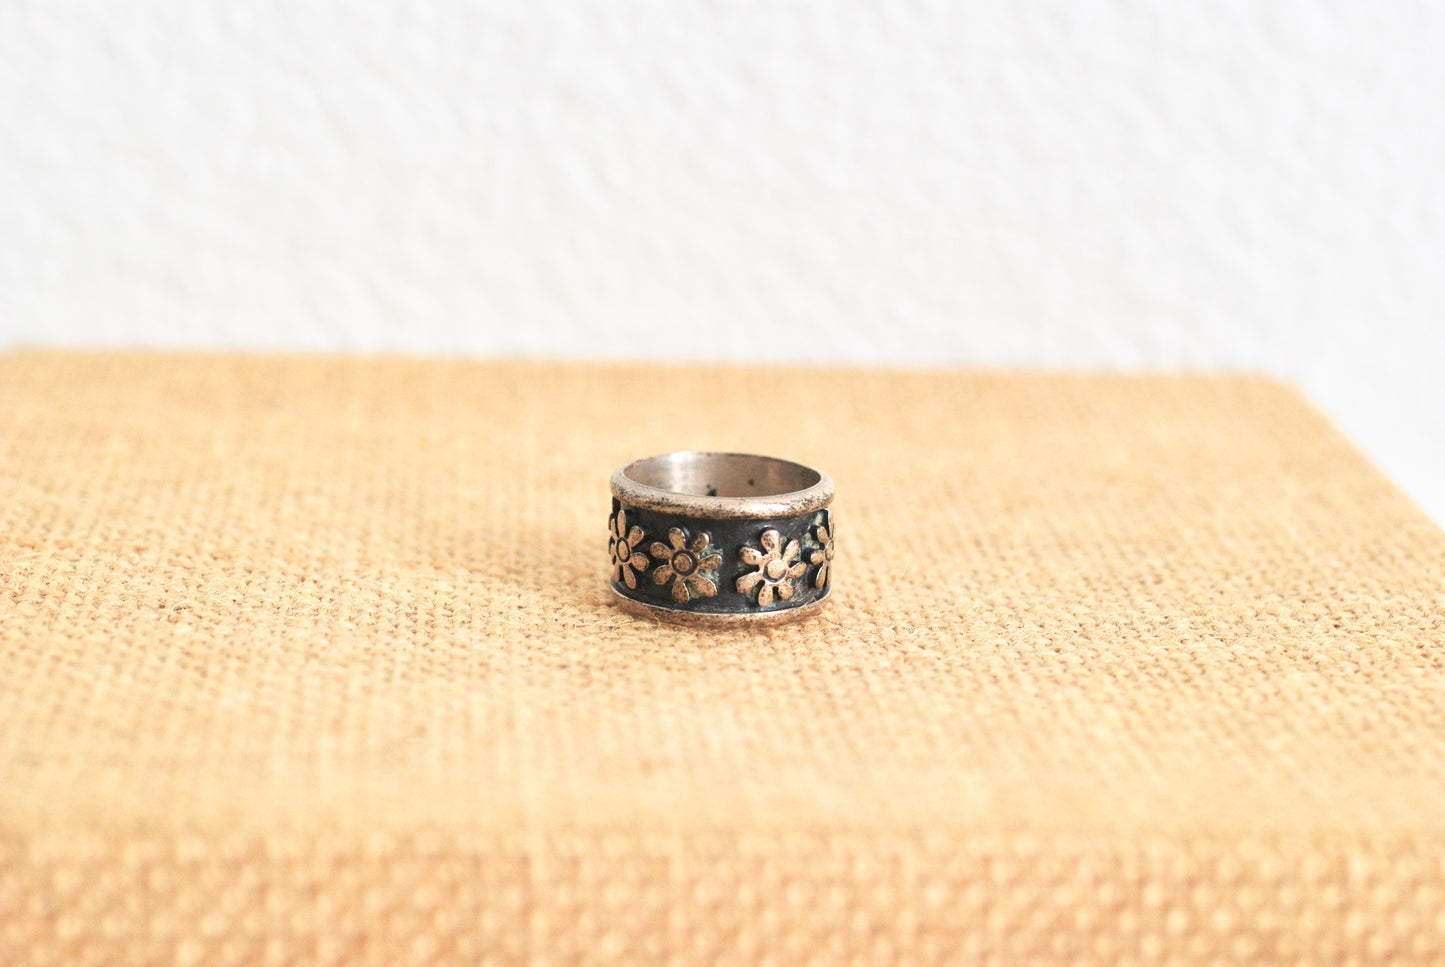 Vintage Mexican Silver Floral Band Ring size 7